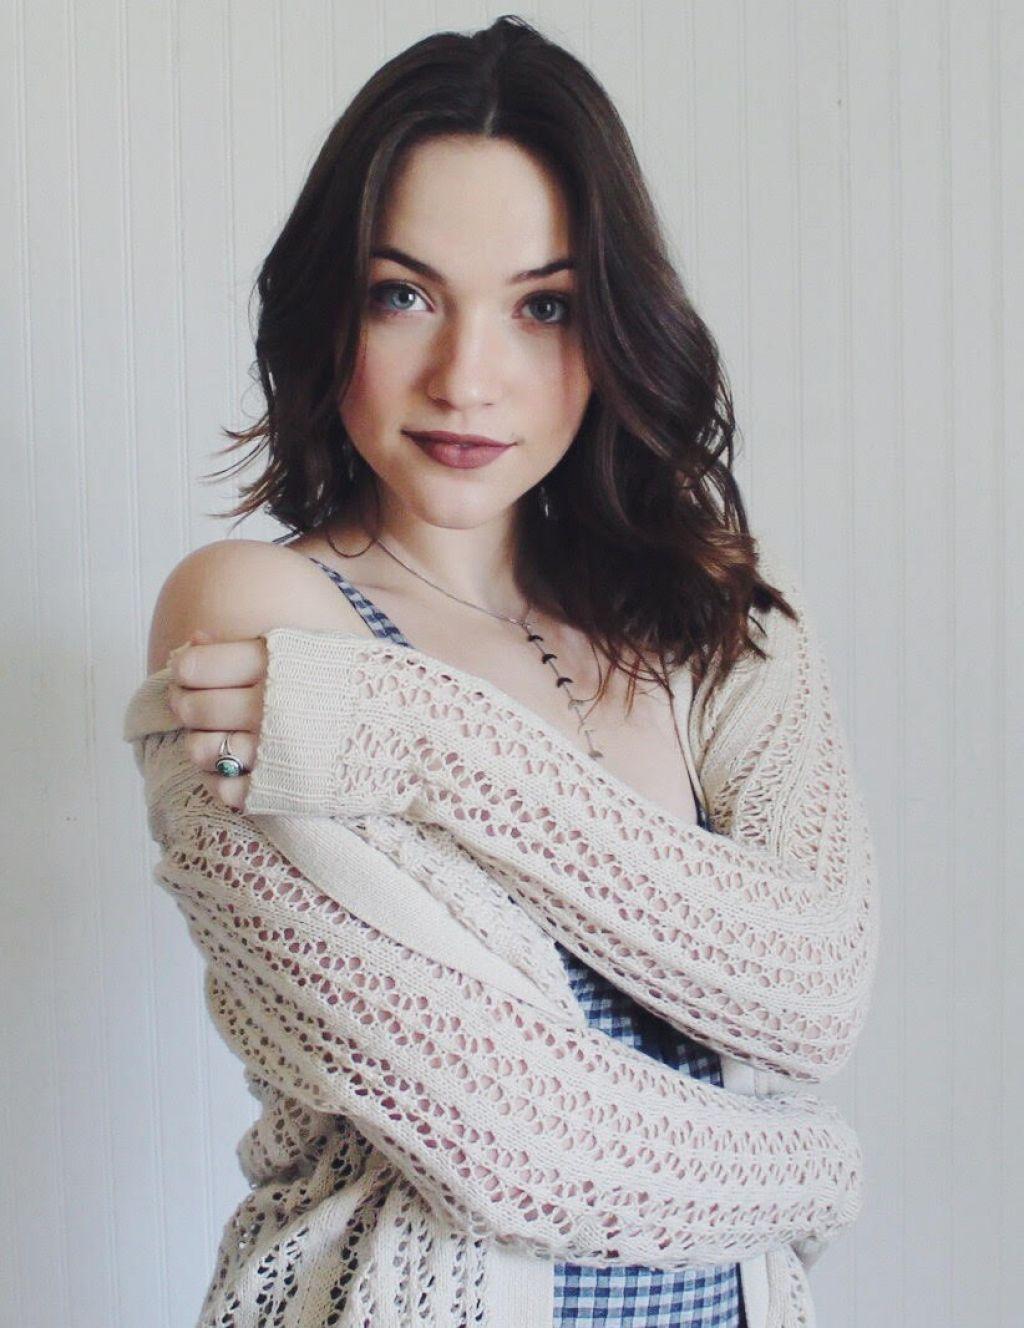 65+ Hot Pictures of Violett Beane – Jesse Quick In The Flash TV Show | Best Of Comic Books